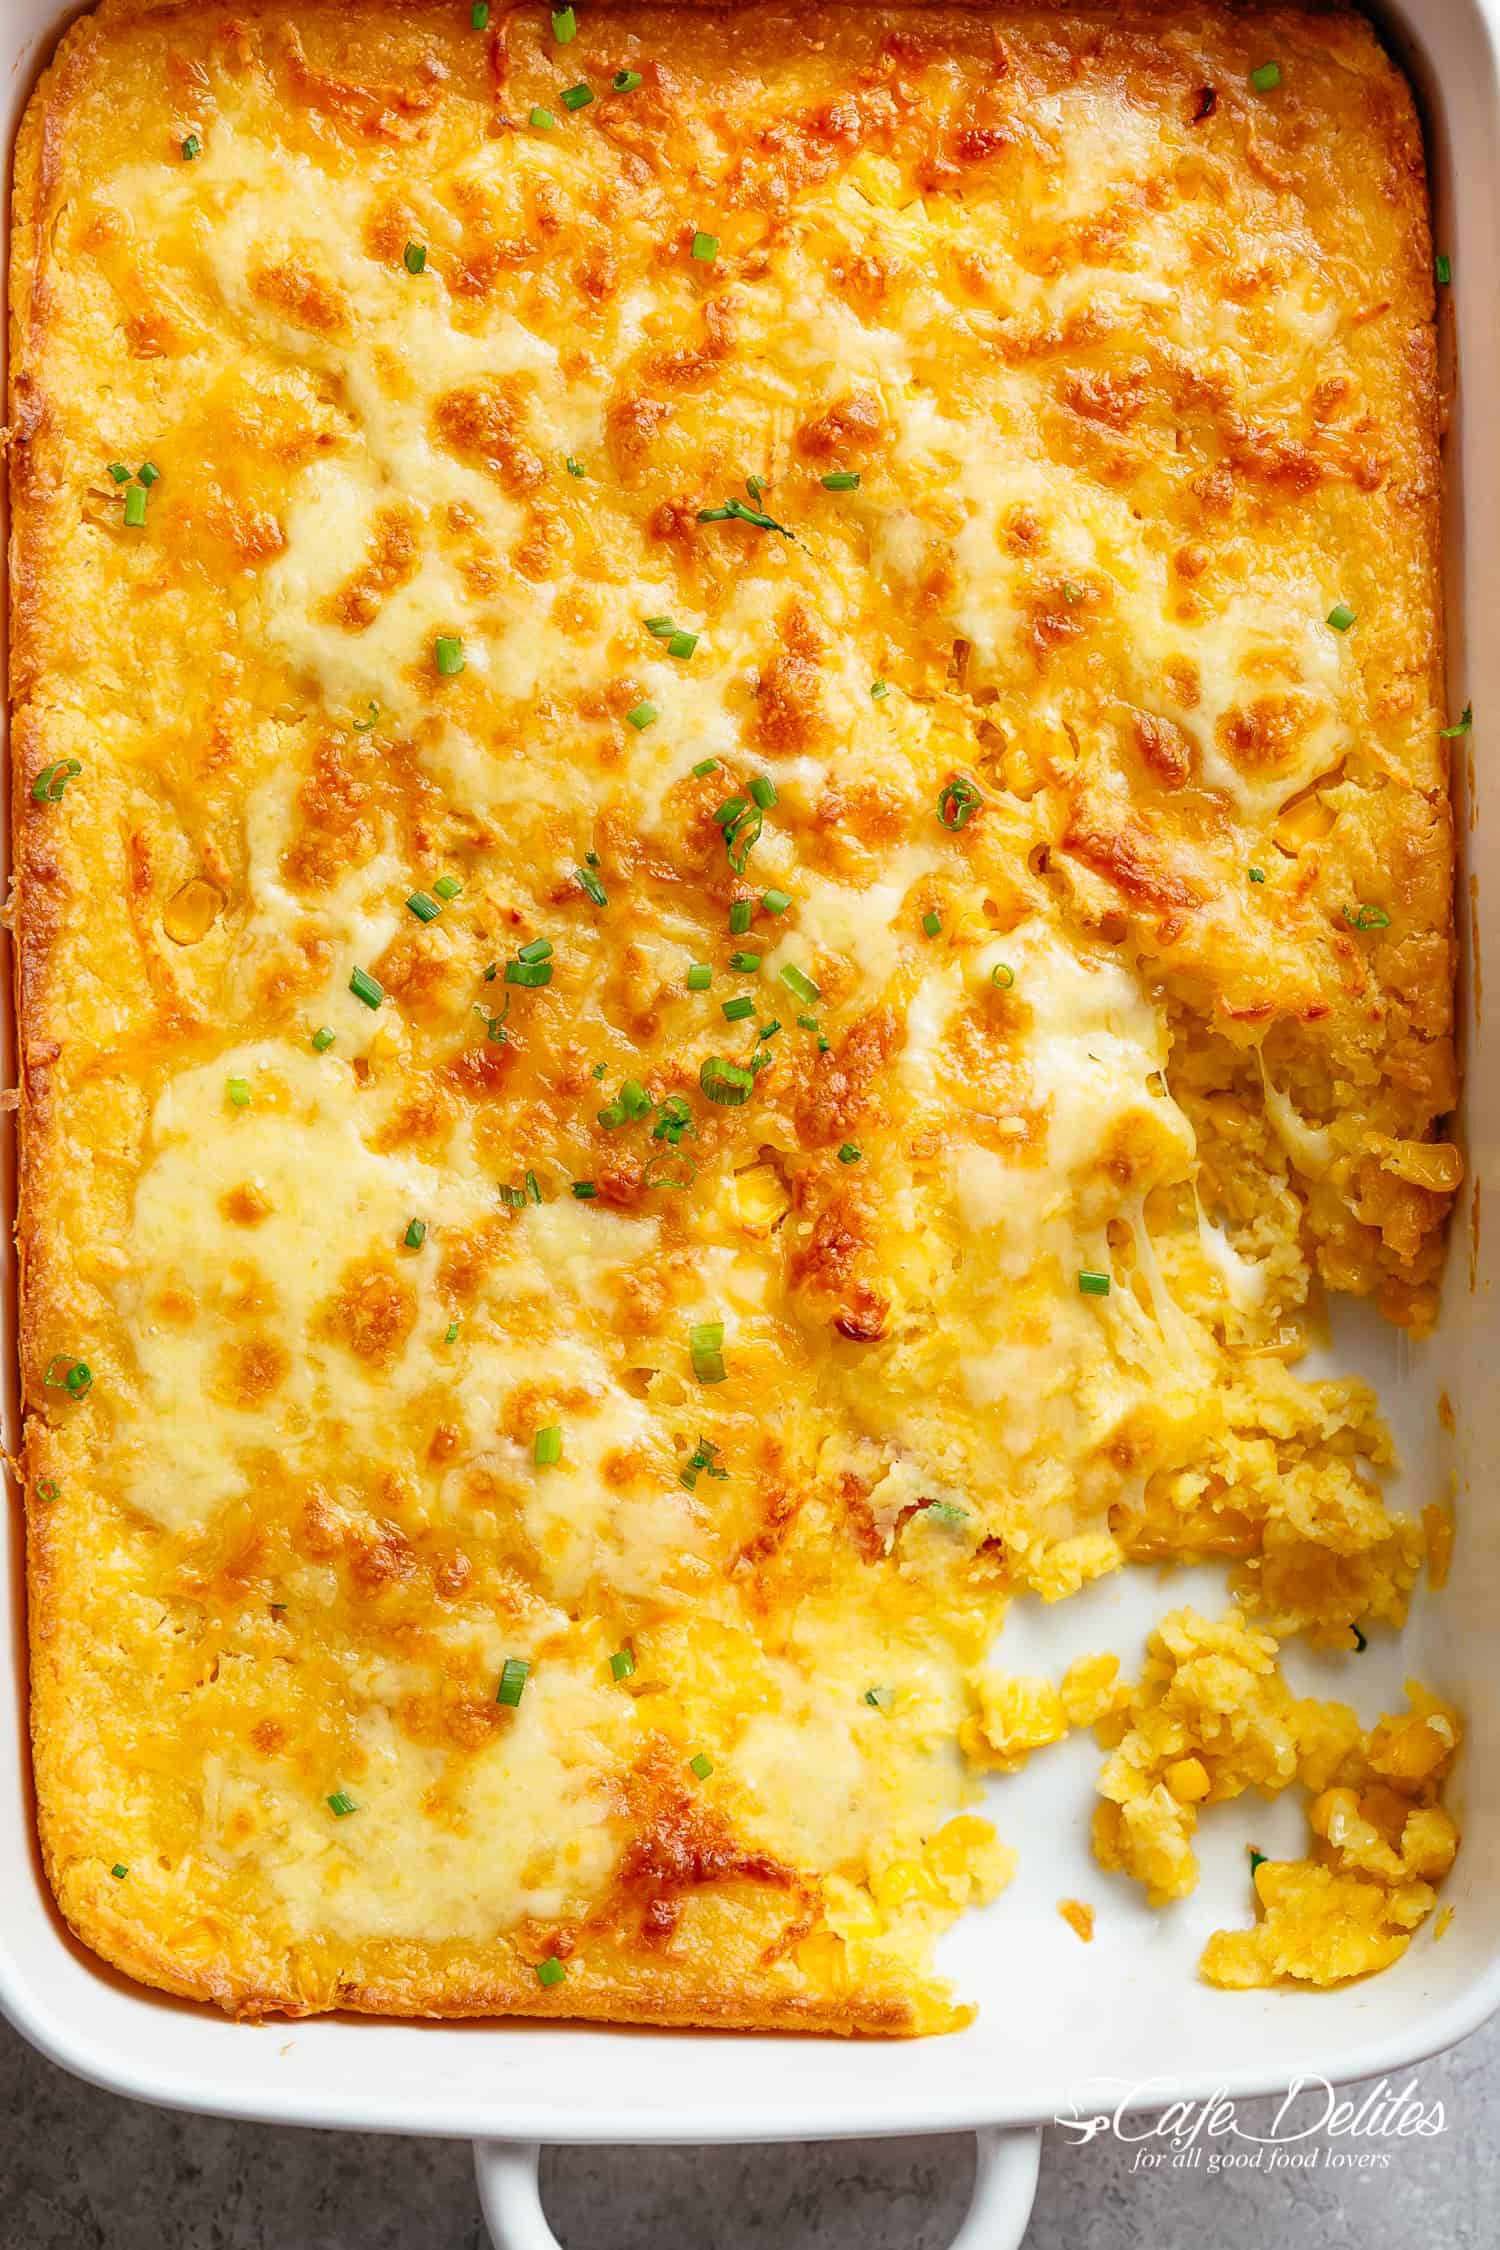 Corn Casserole baked in a casserole dish is an easy Thanksgiving side dish.